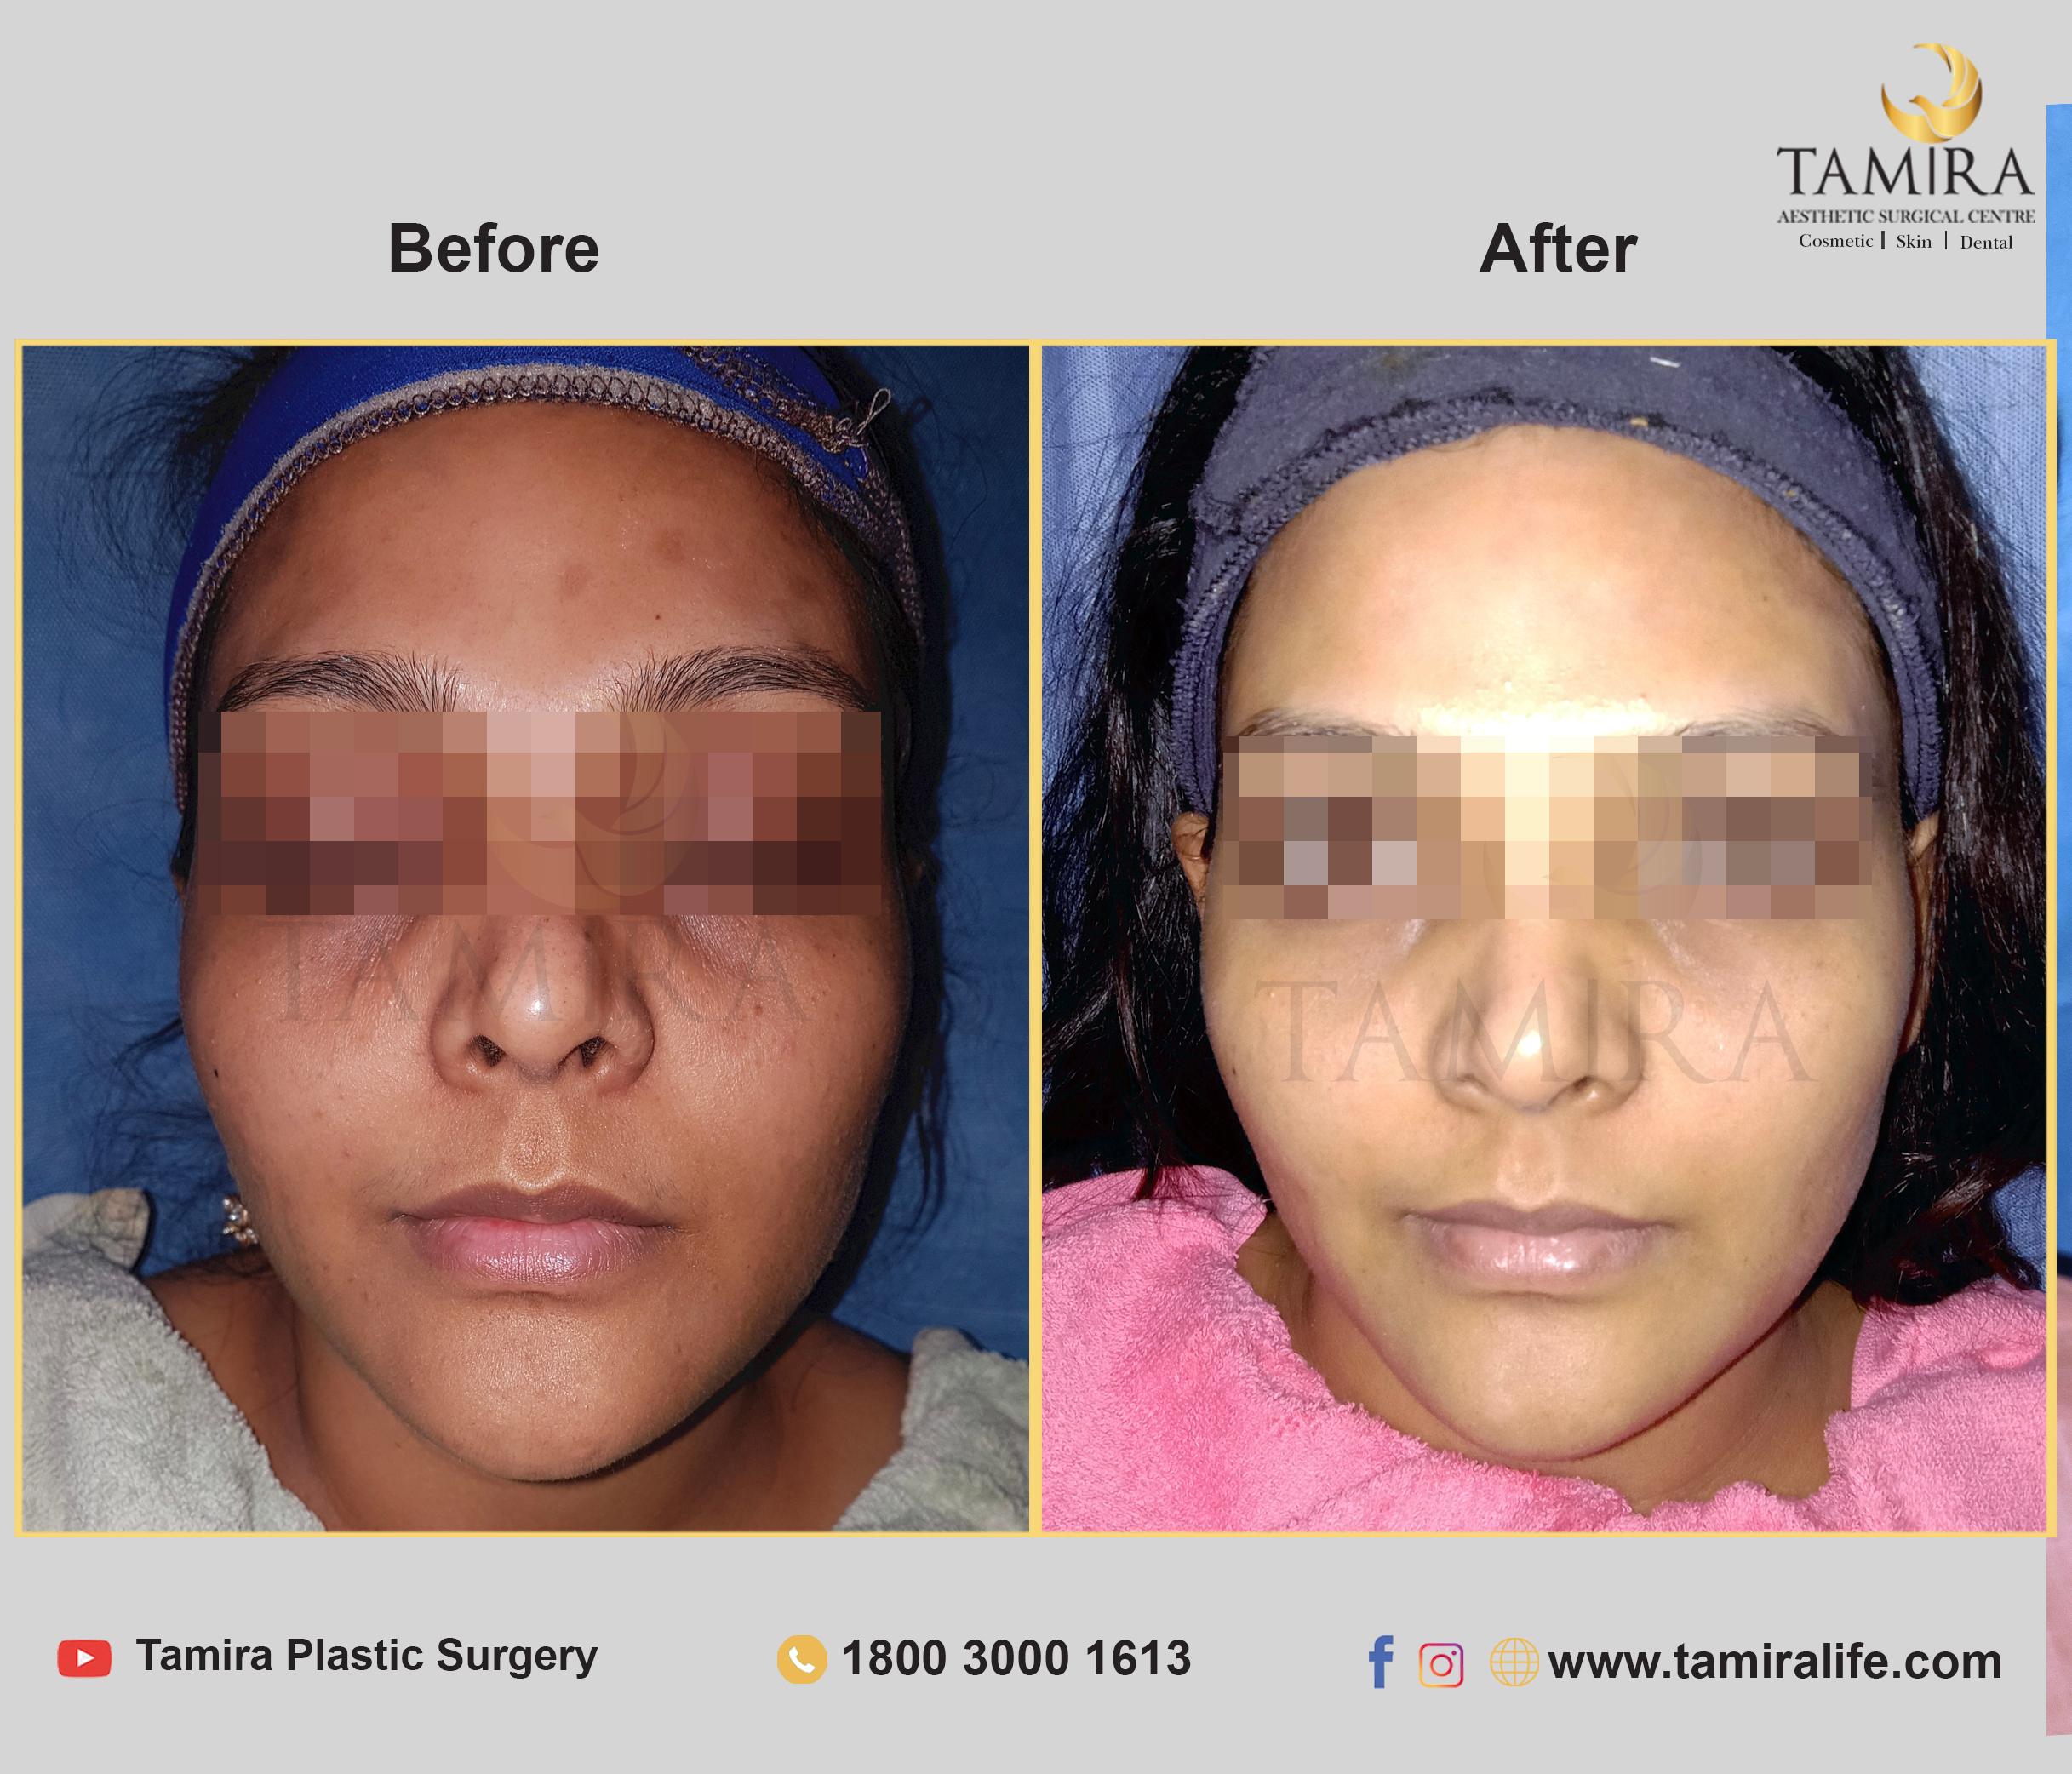 Hydra Facial - Before & After